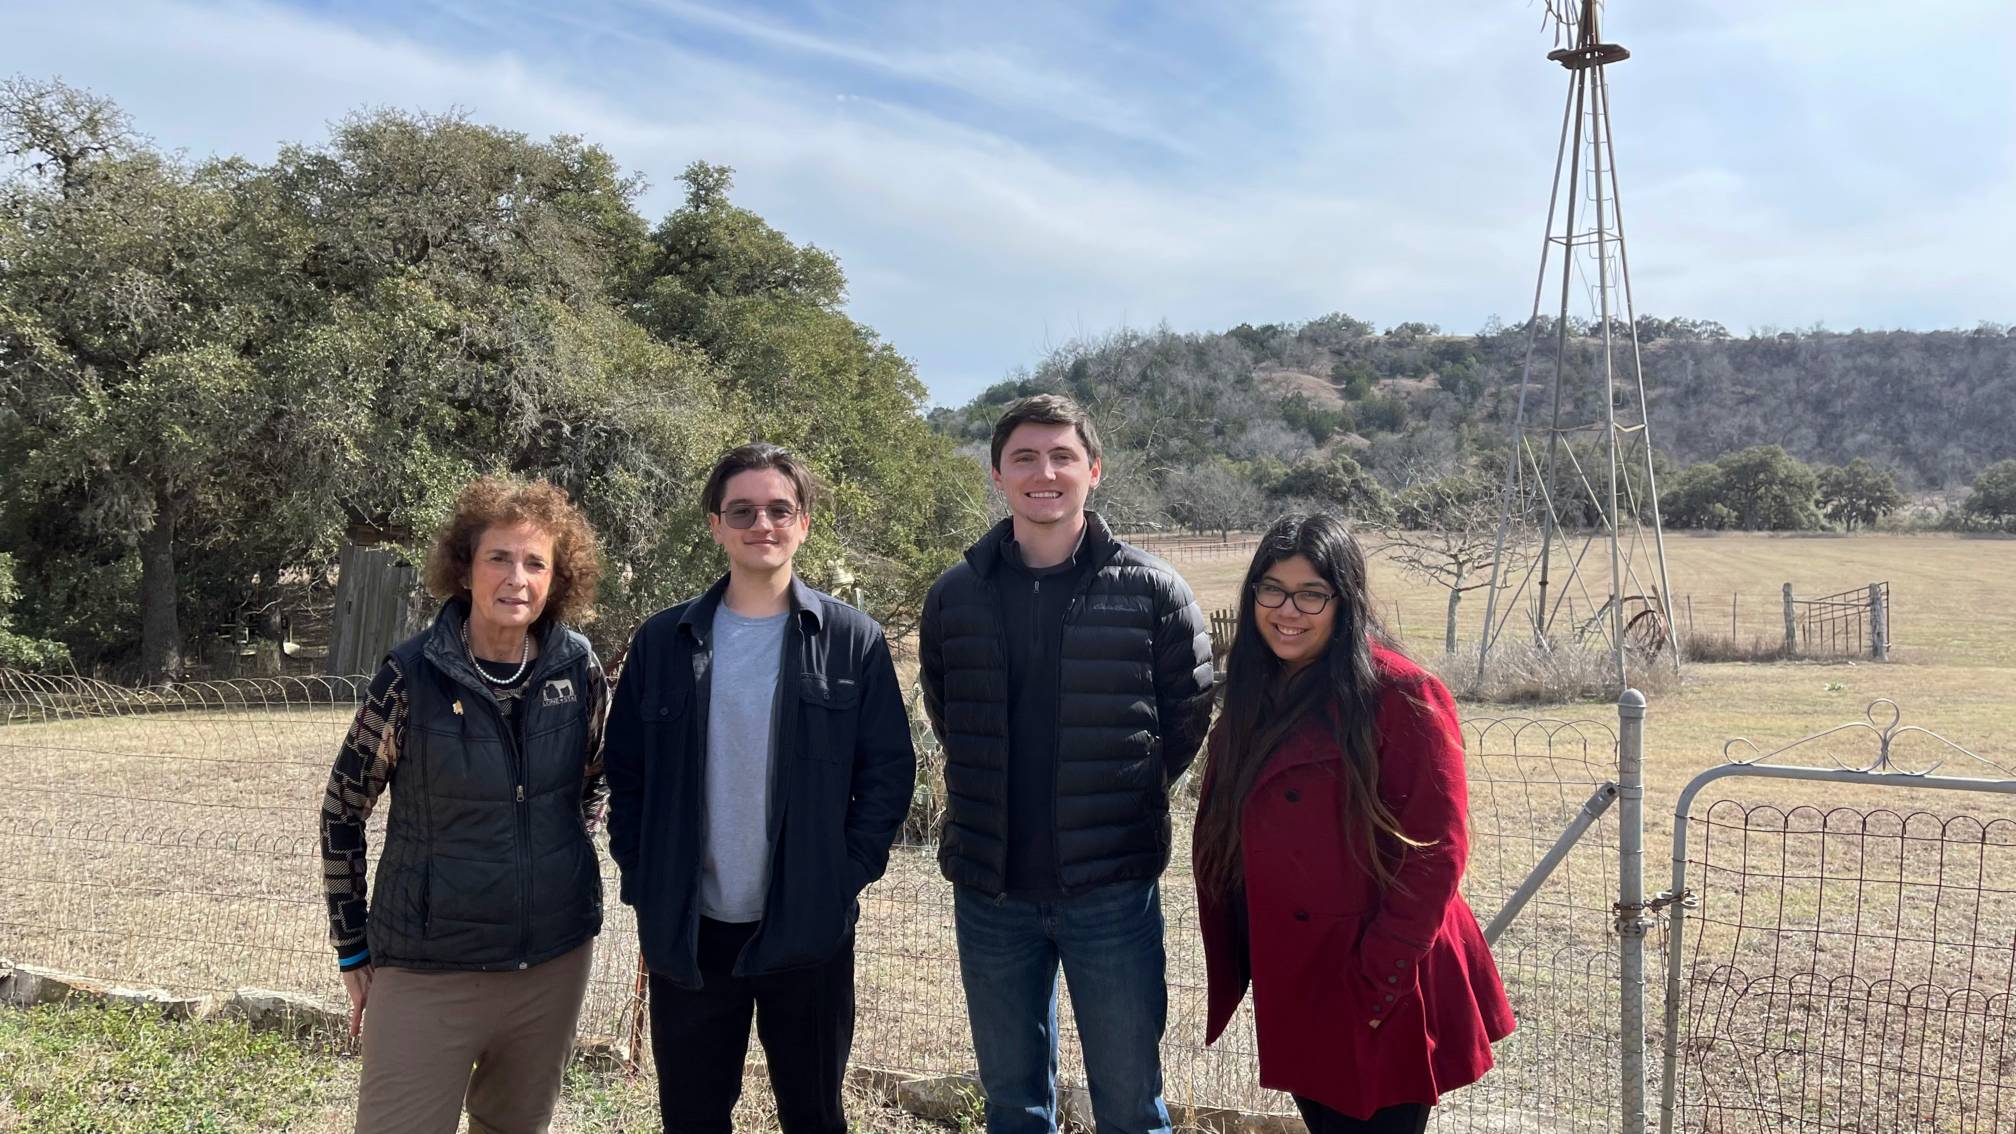 Dr. Janet Hale and students outside at a ranch